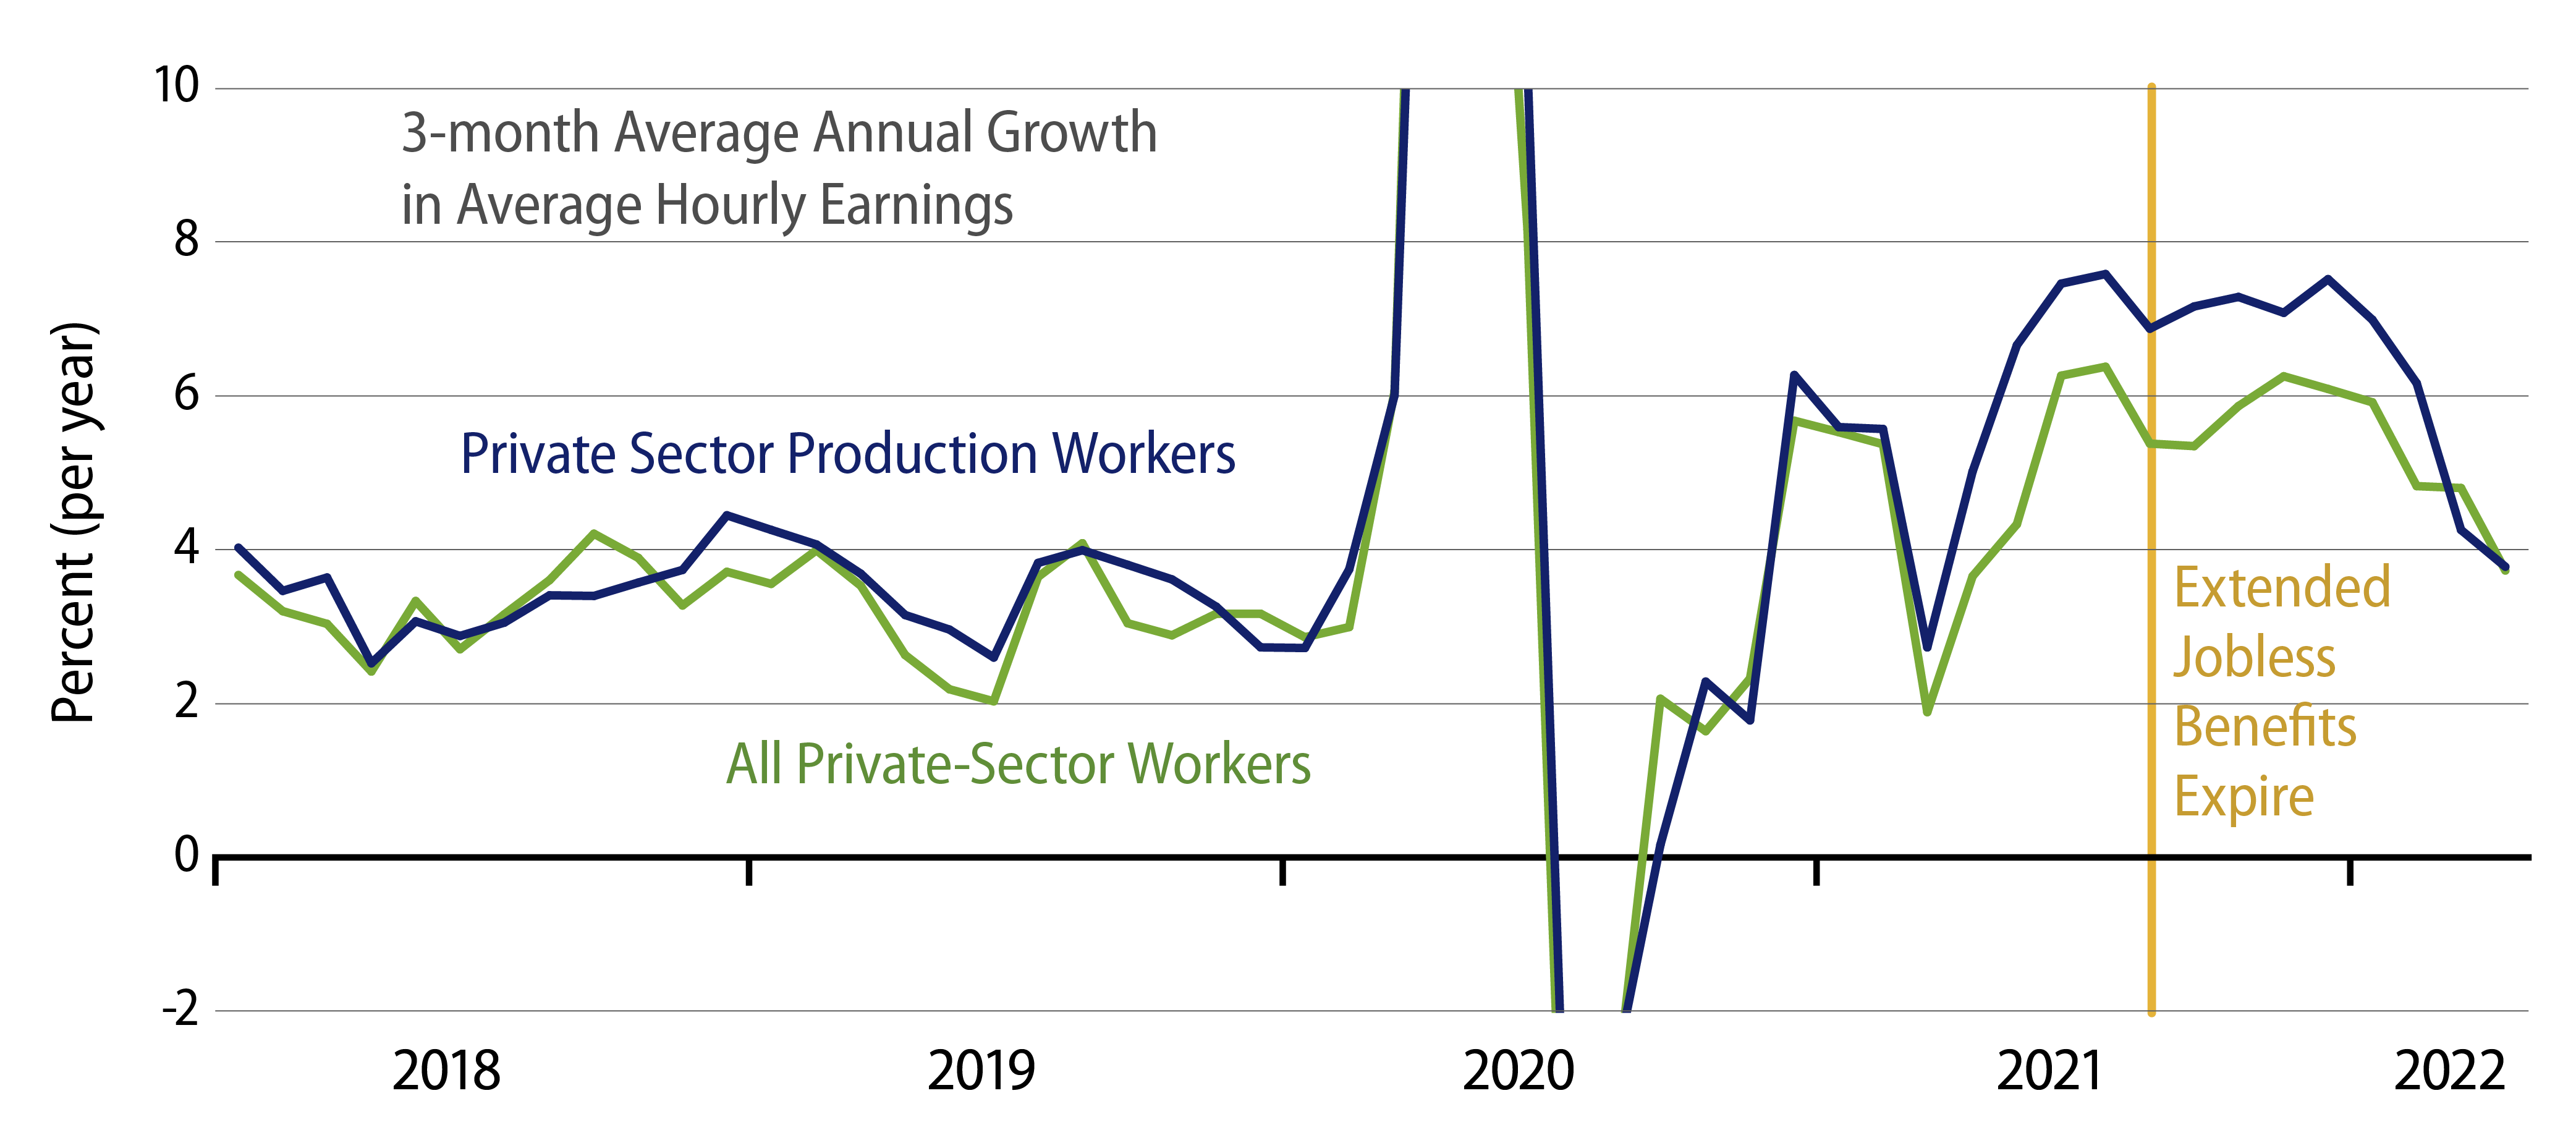 Growth in Average Hourly Earnings